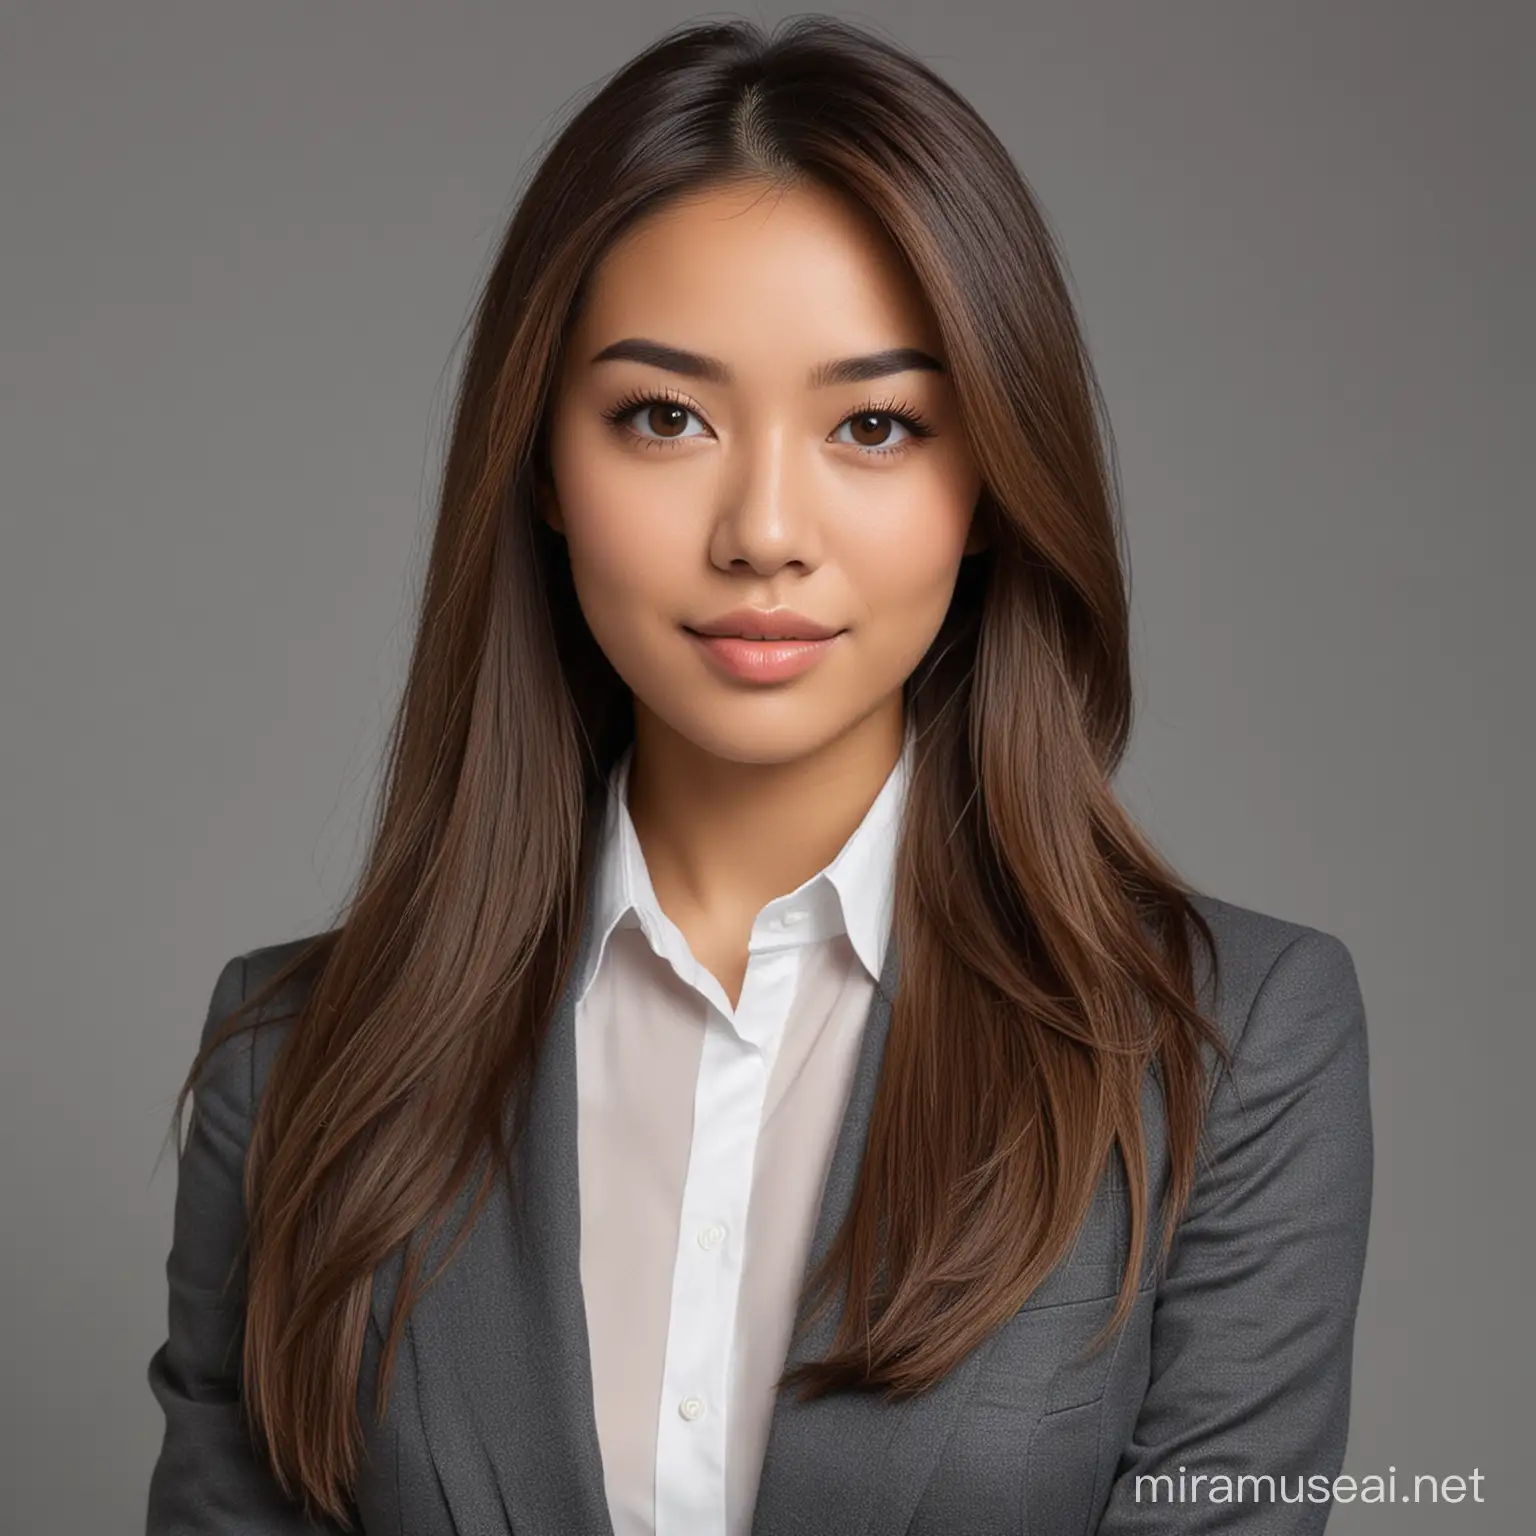 Young Asian Female Real Estate Assistant with Bright Eyes